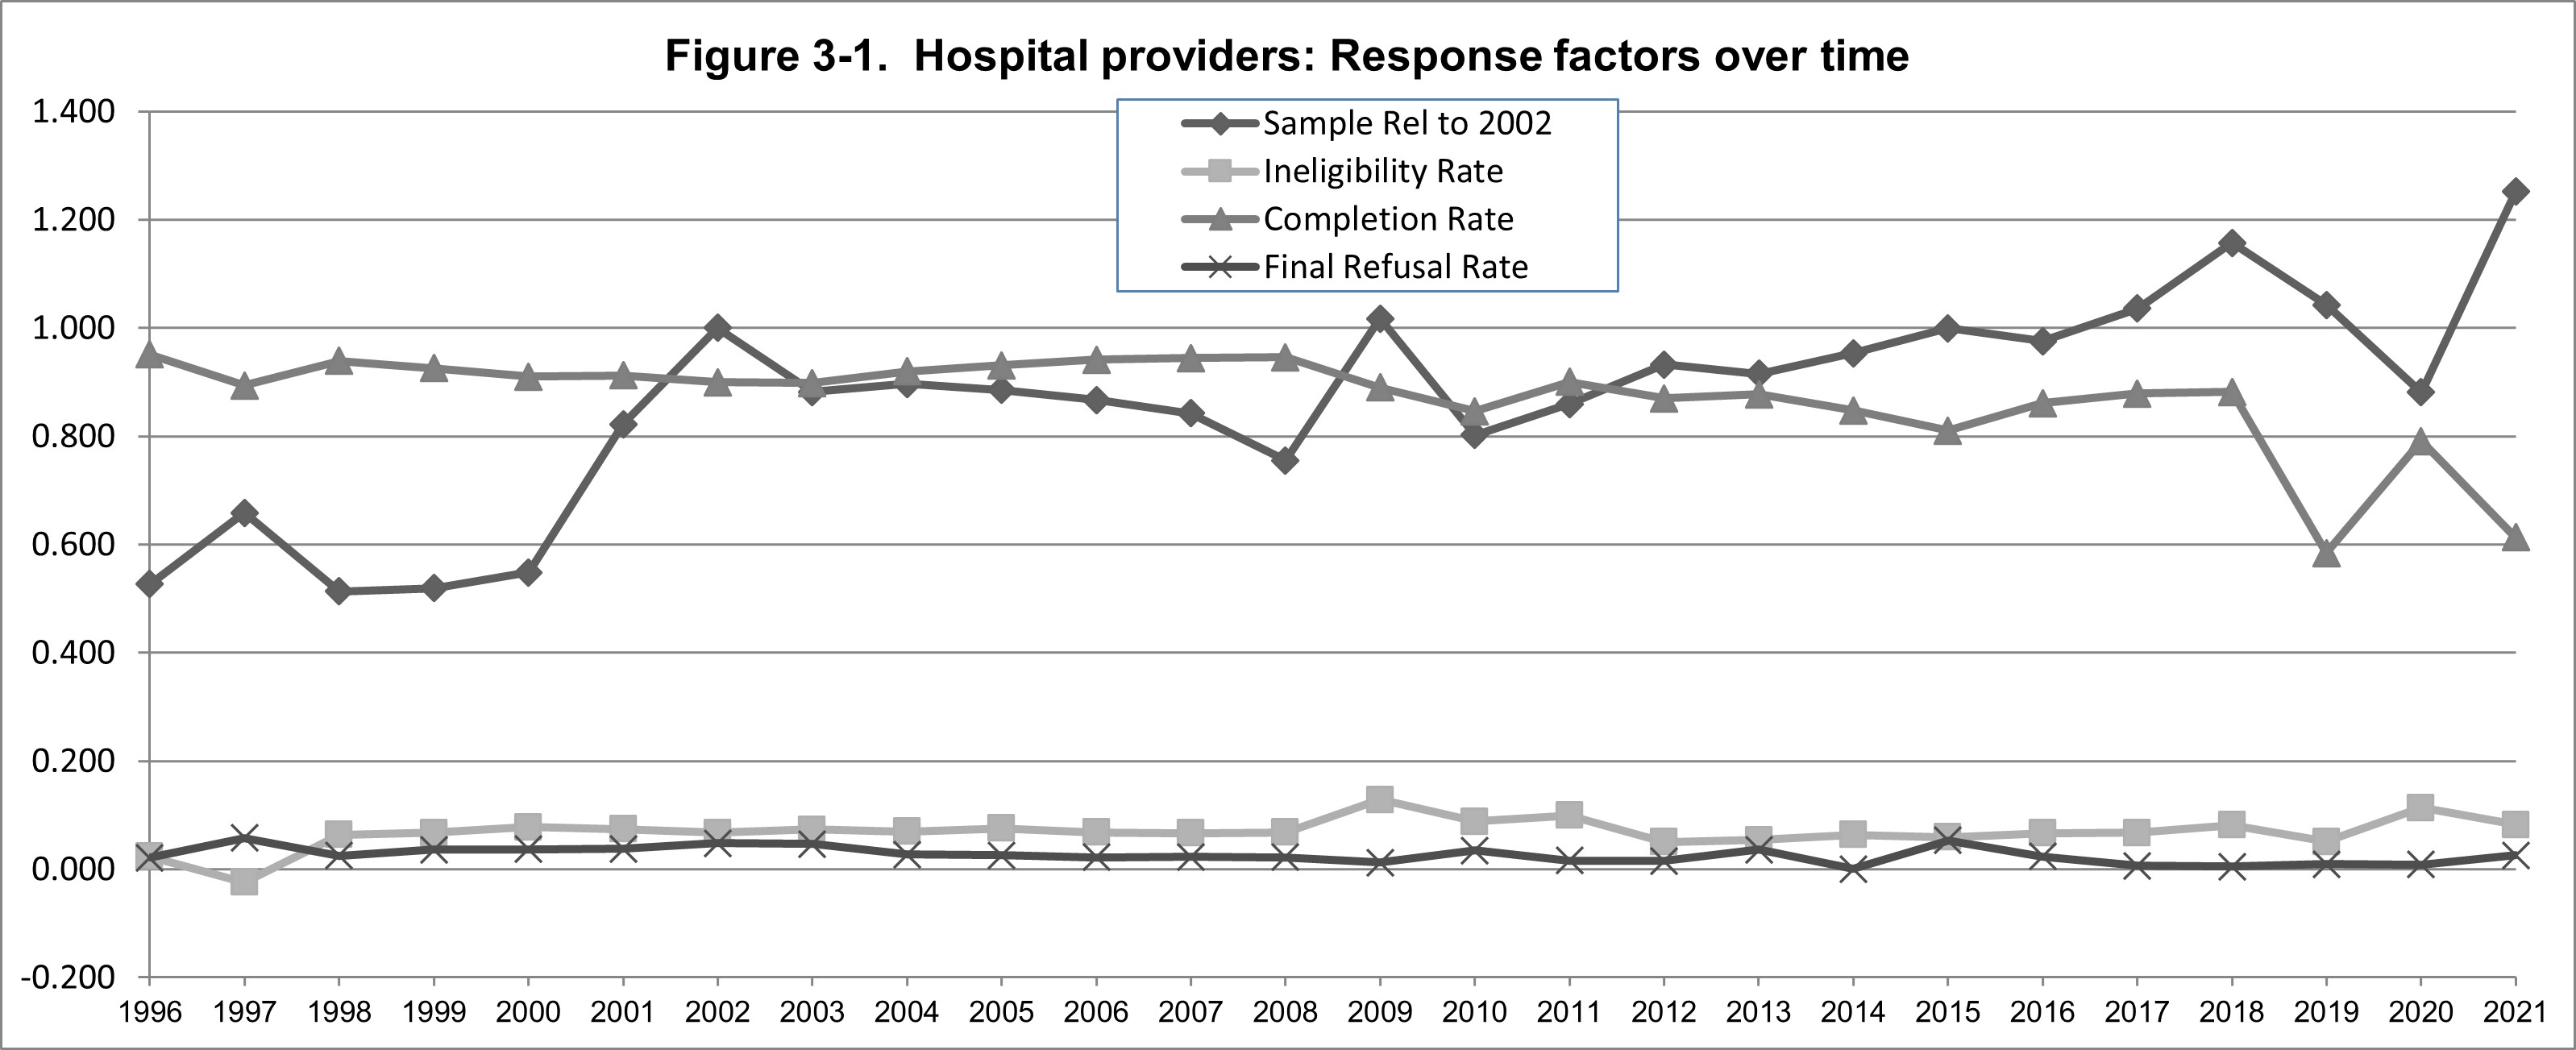 Image displaying response factors over time, from 1996 through 2021 for Hospital providers